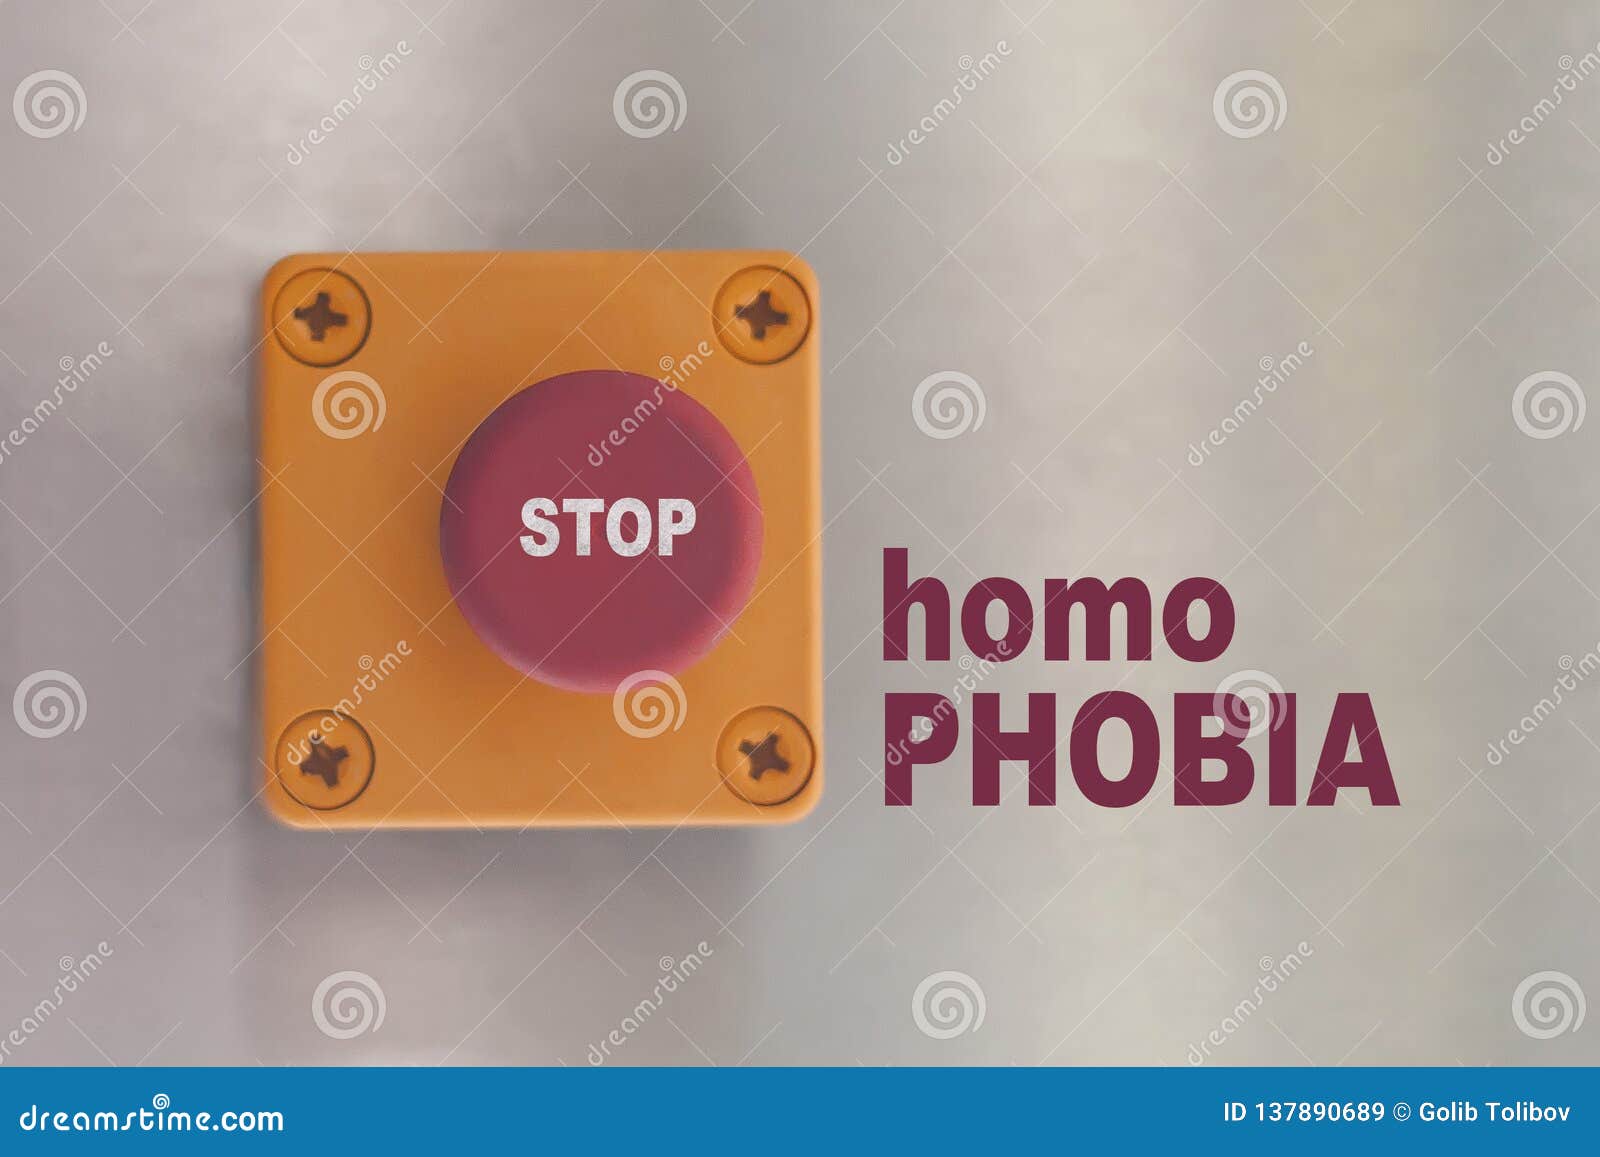 industrial switching button with text: stop homophobia